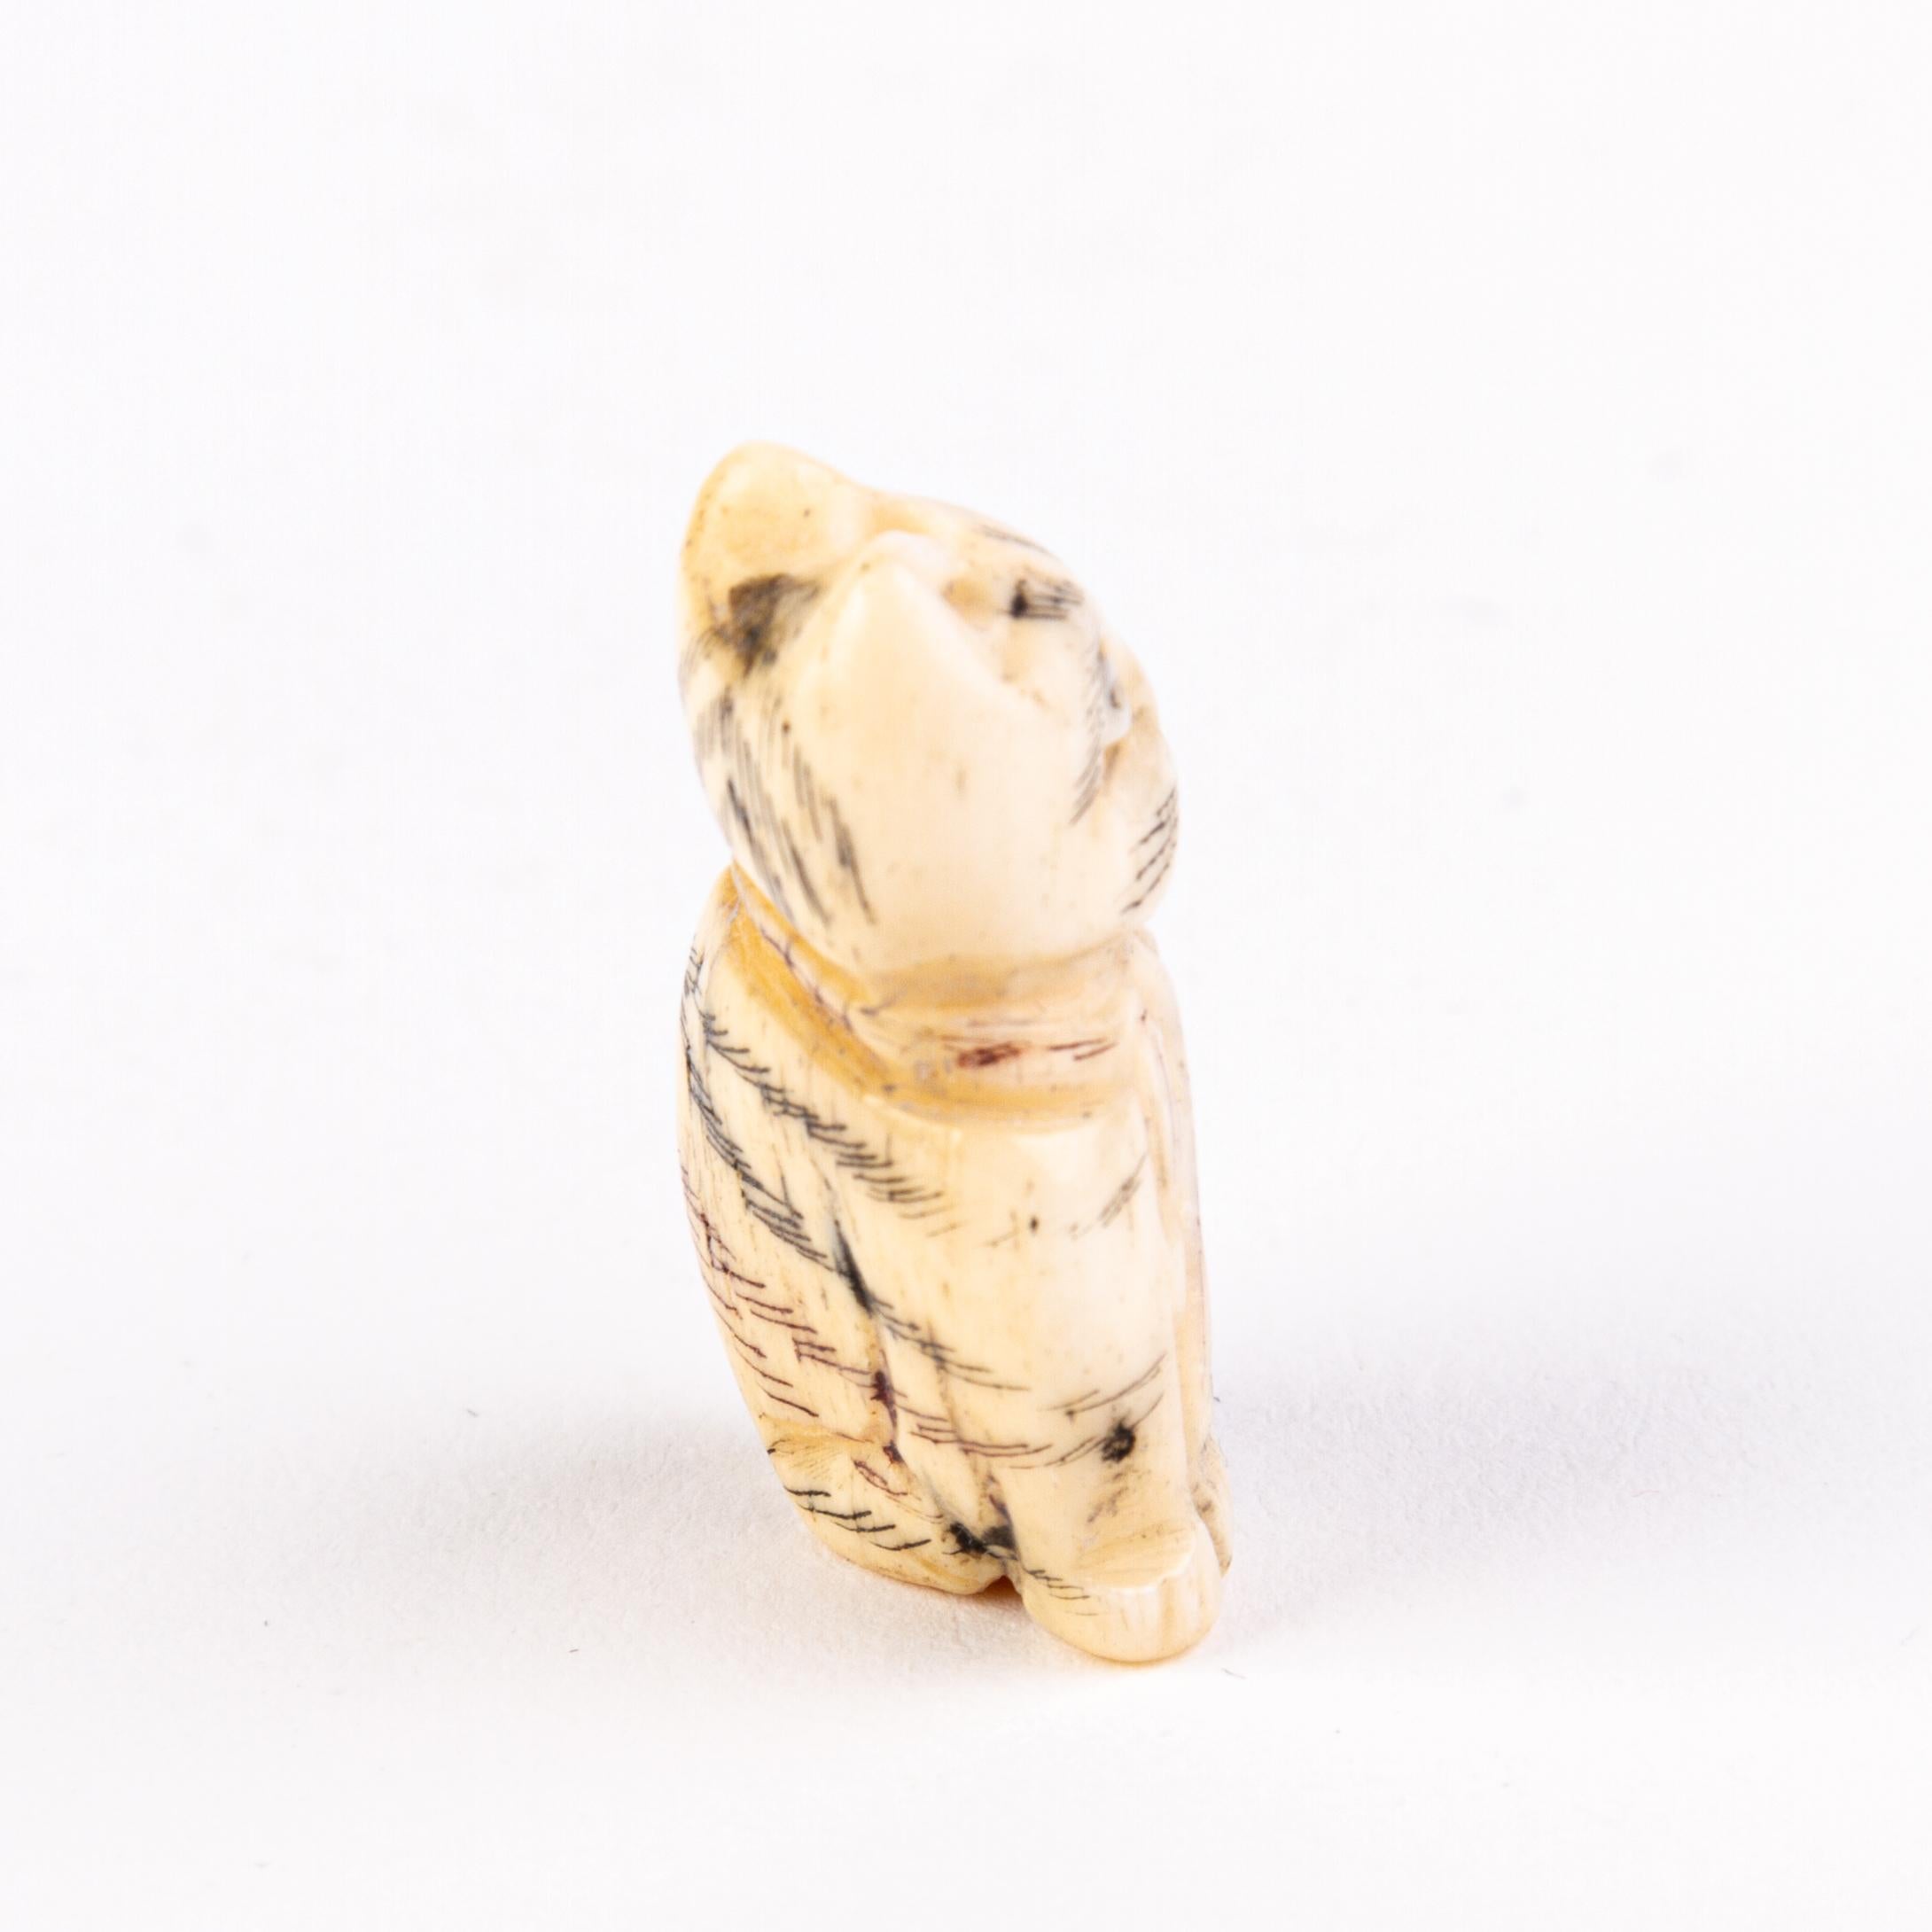 In good condition
From a private collection
Free international shipping
Japanese Meiji Netsuke Inro Cat